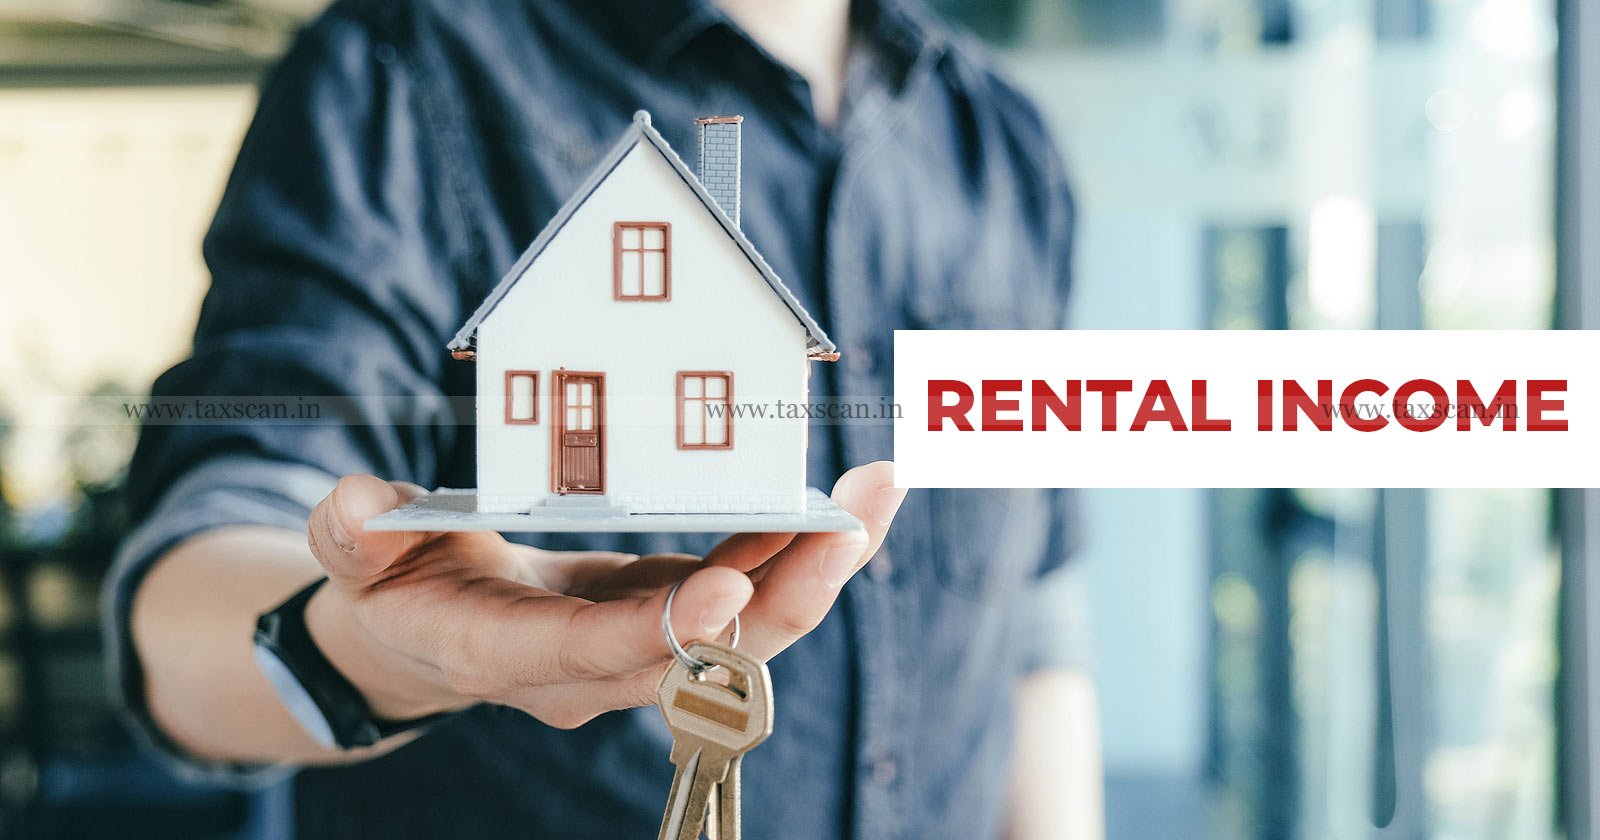 Rental Income received - from letting out property is taxable - Income from House Property - ITAT allows deduction - Income Tax Act -TAXSCAN